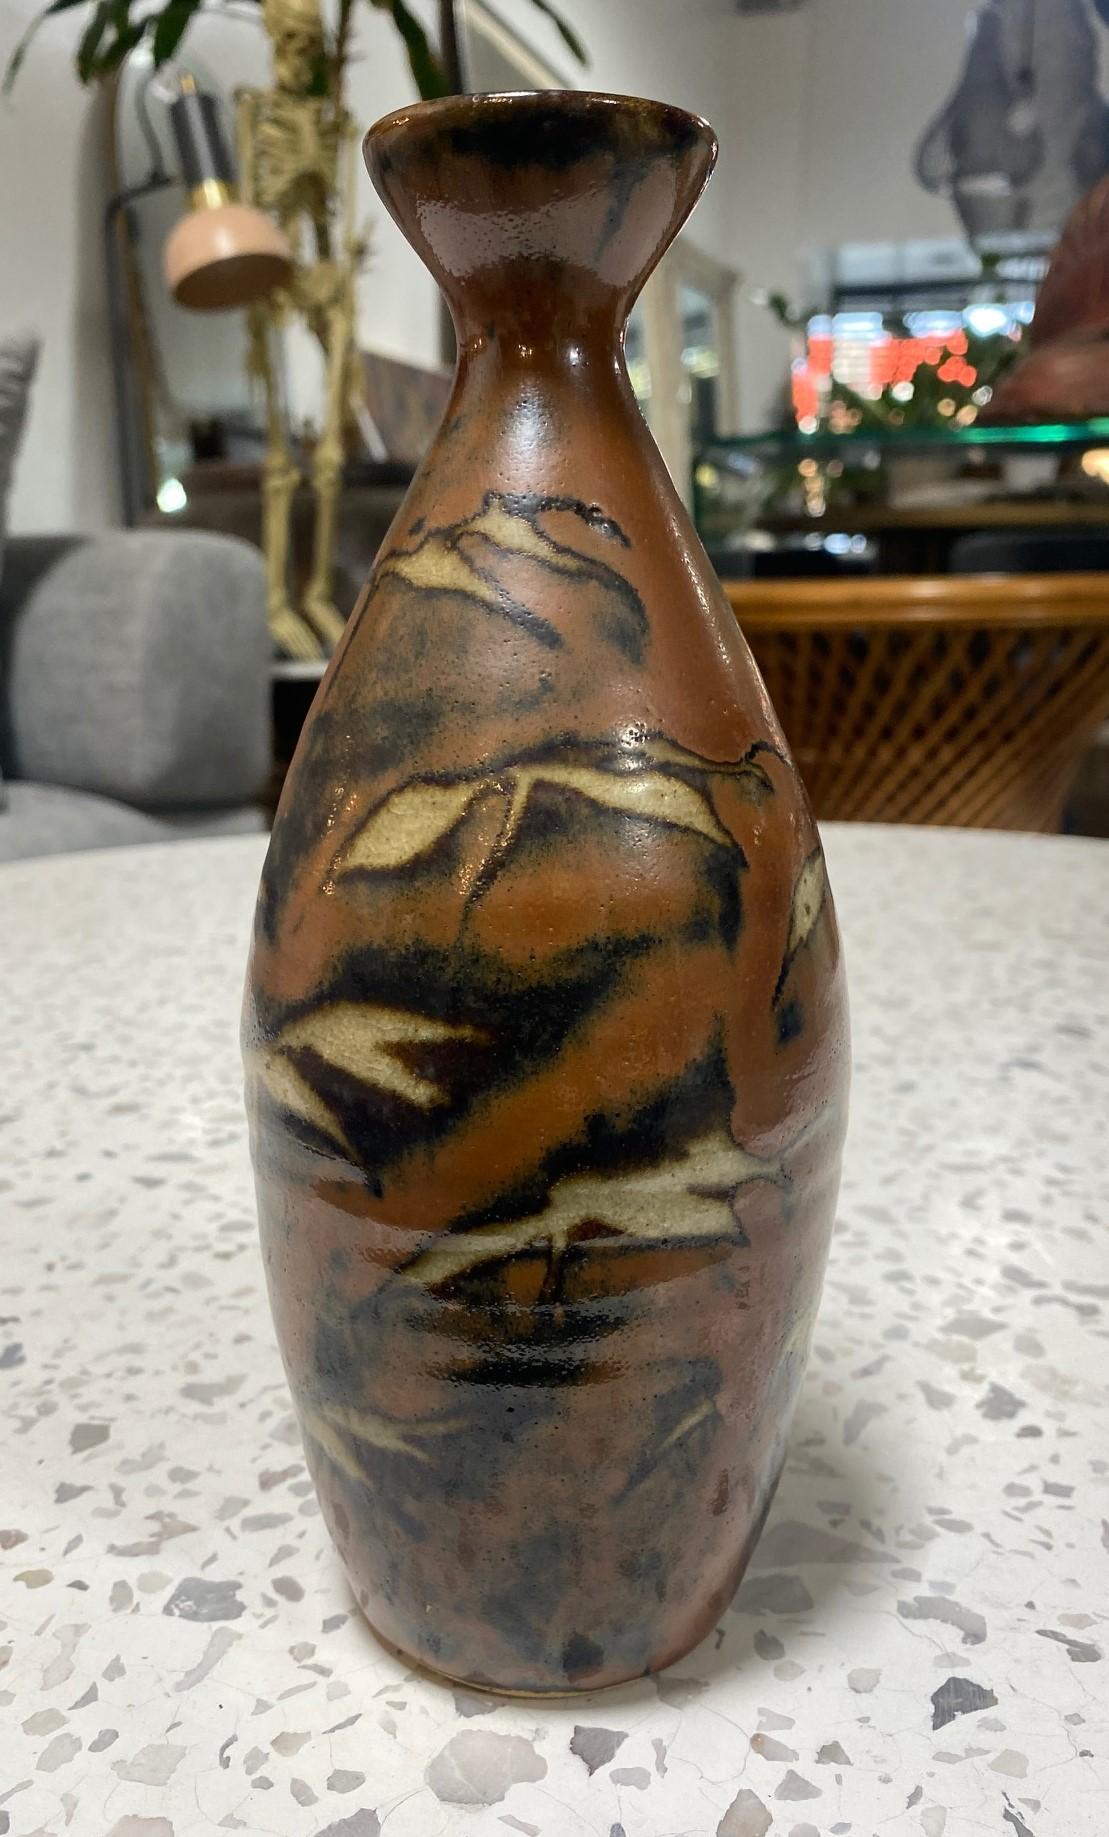 An exquisite, beautifully crafted, sumptuously glazed vase by master Japanese Mingei potter Shoji Hamada, which features a fine example of his highly coveted rich Kaki/persimmon glaze. The original Hamada stamped/sealed and signed box is included.